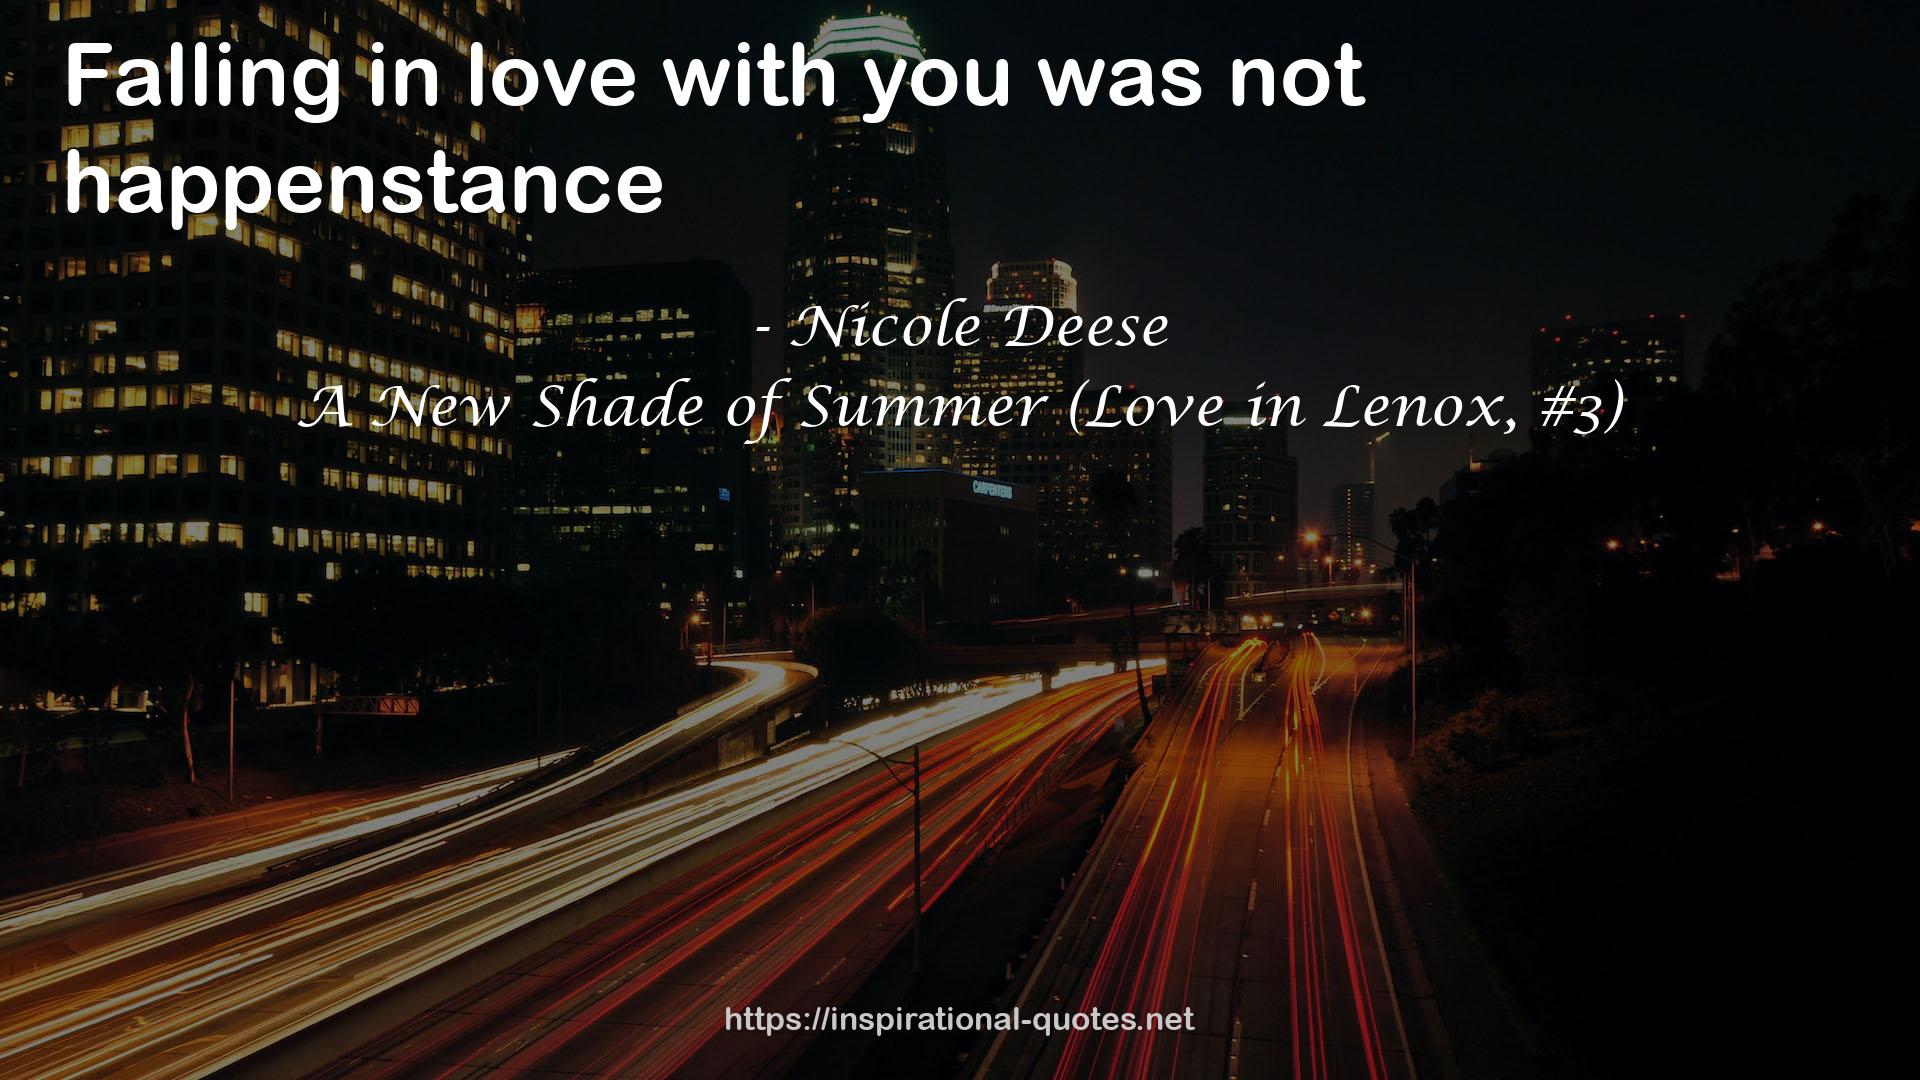 A New Shade of Summer (Love in Lenox, #3) QUOTES